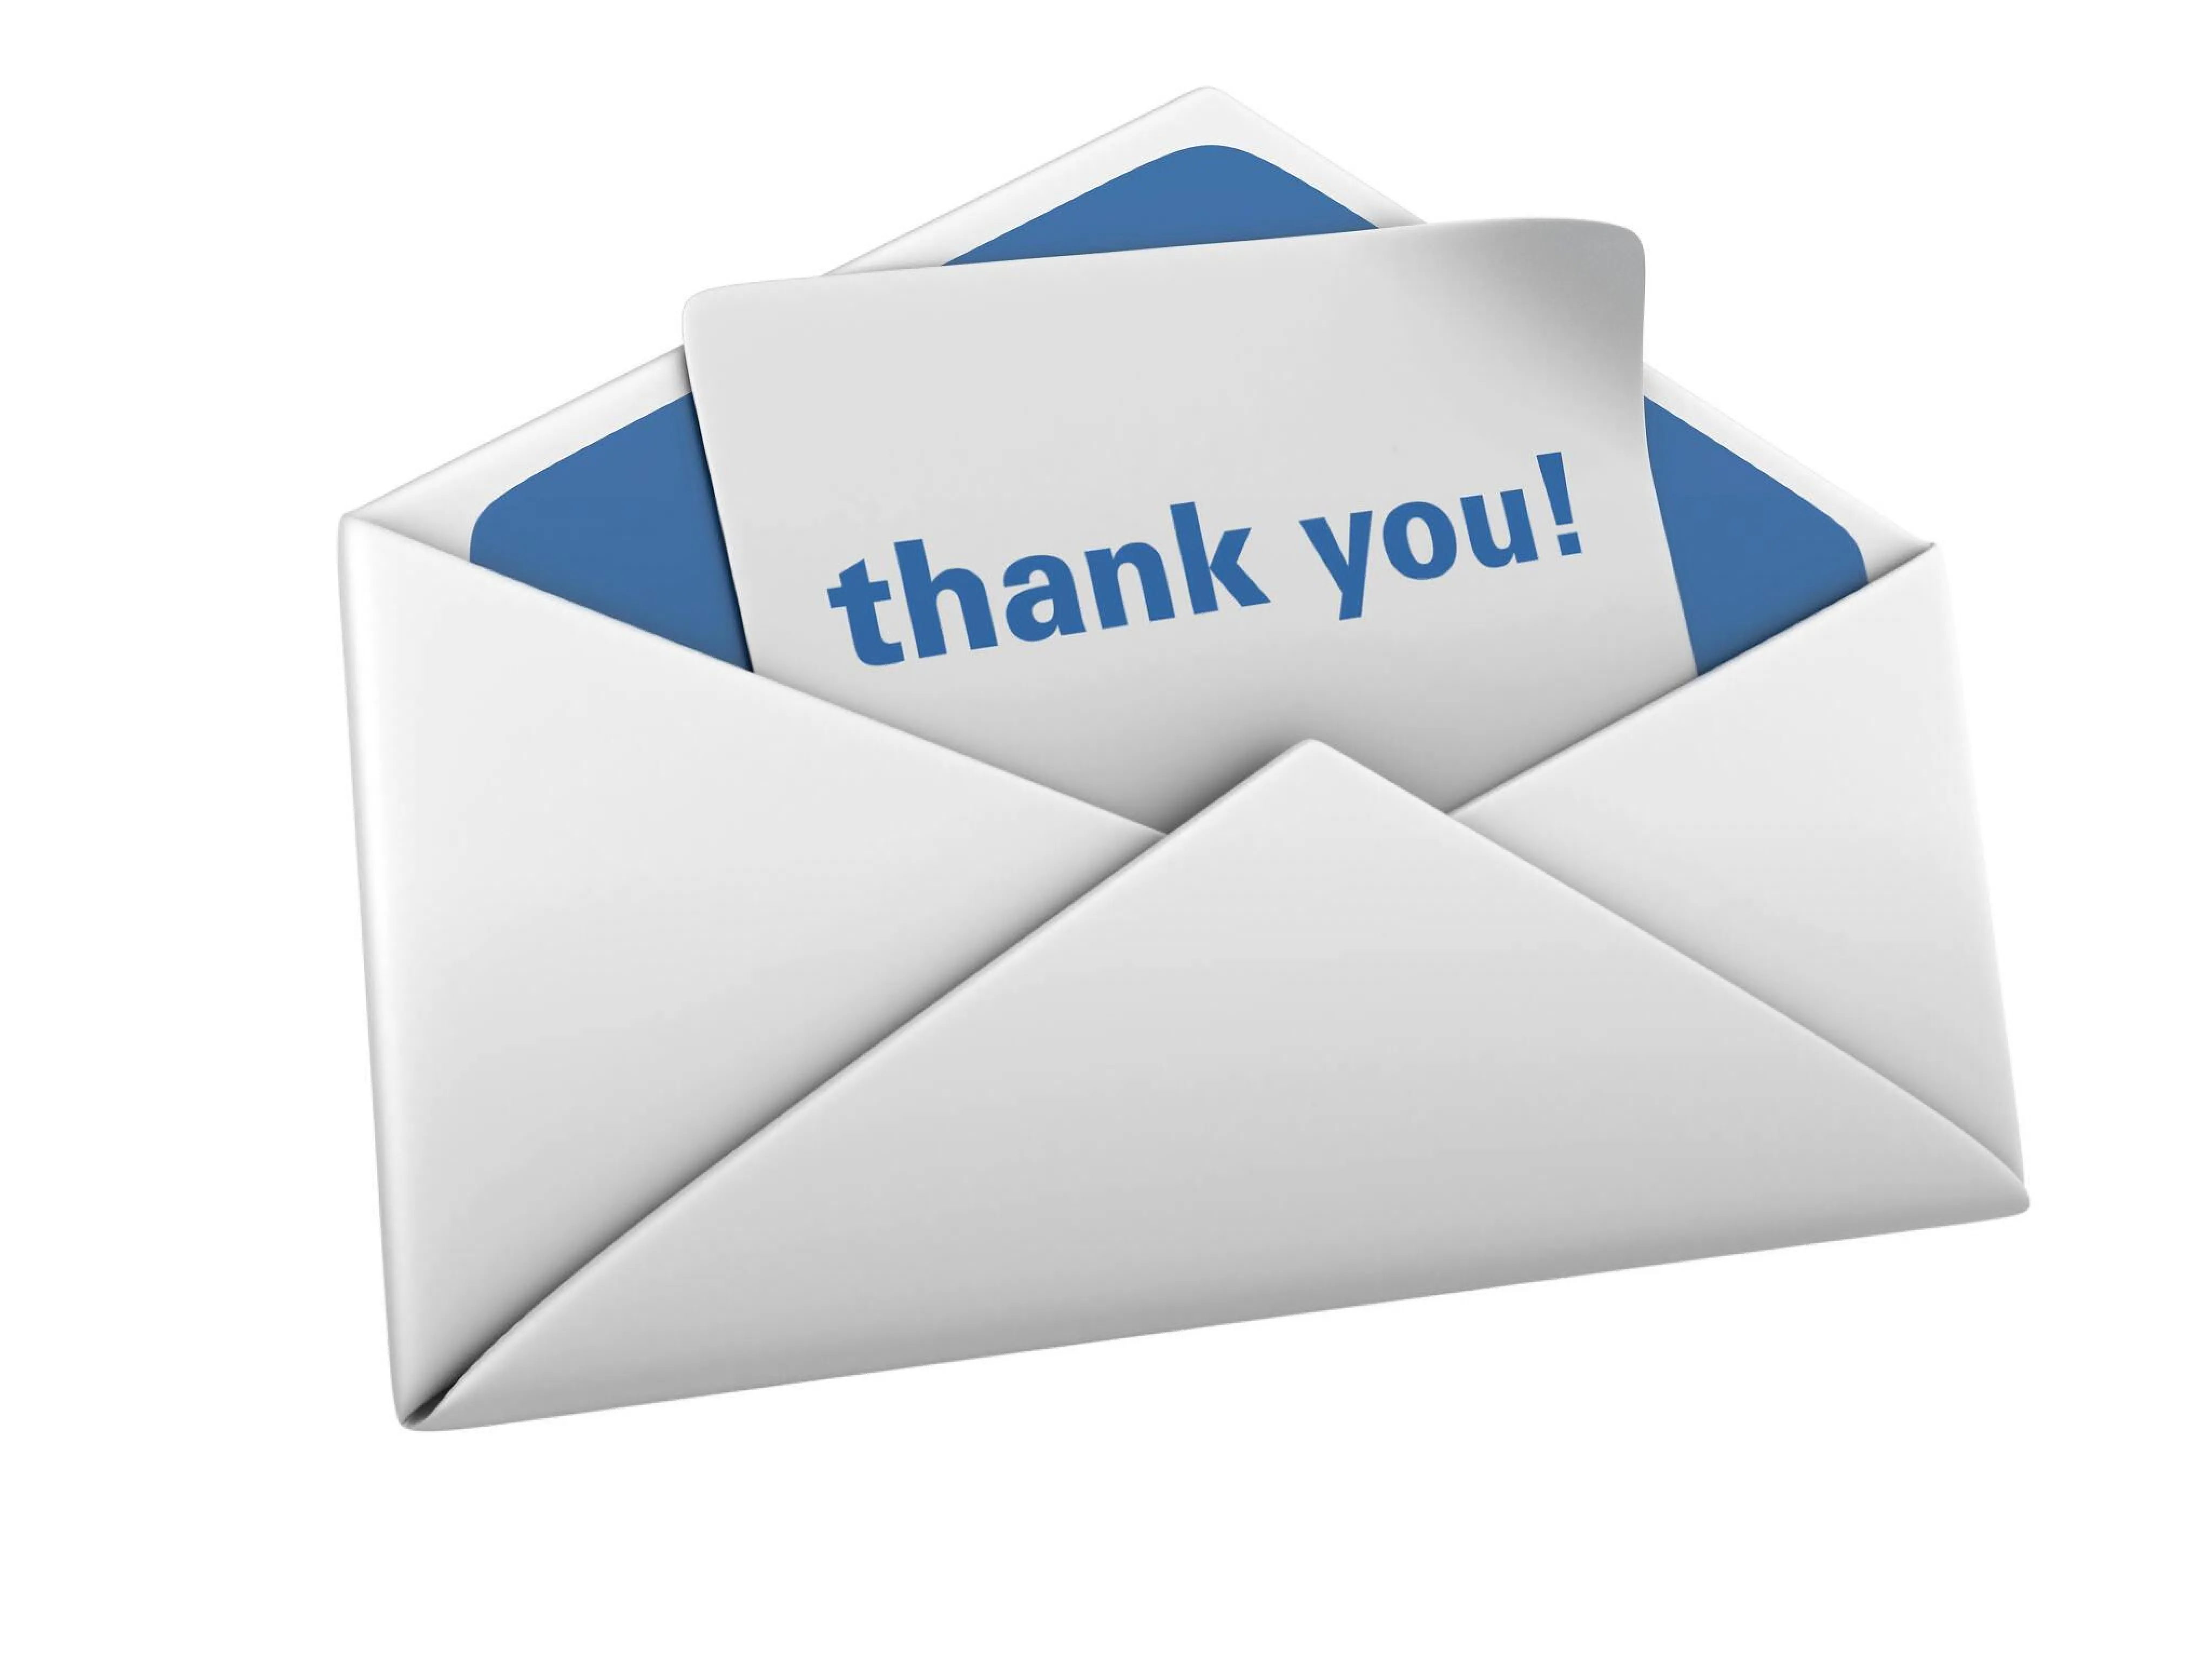 The importance of sending a thank-you email after an interview